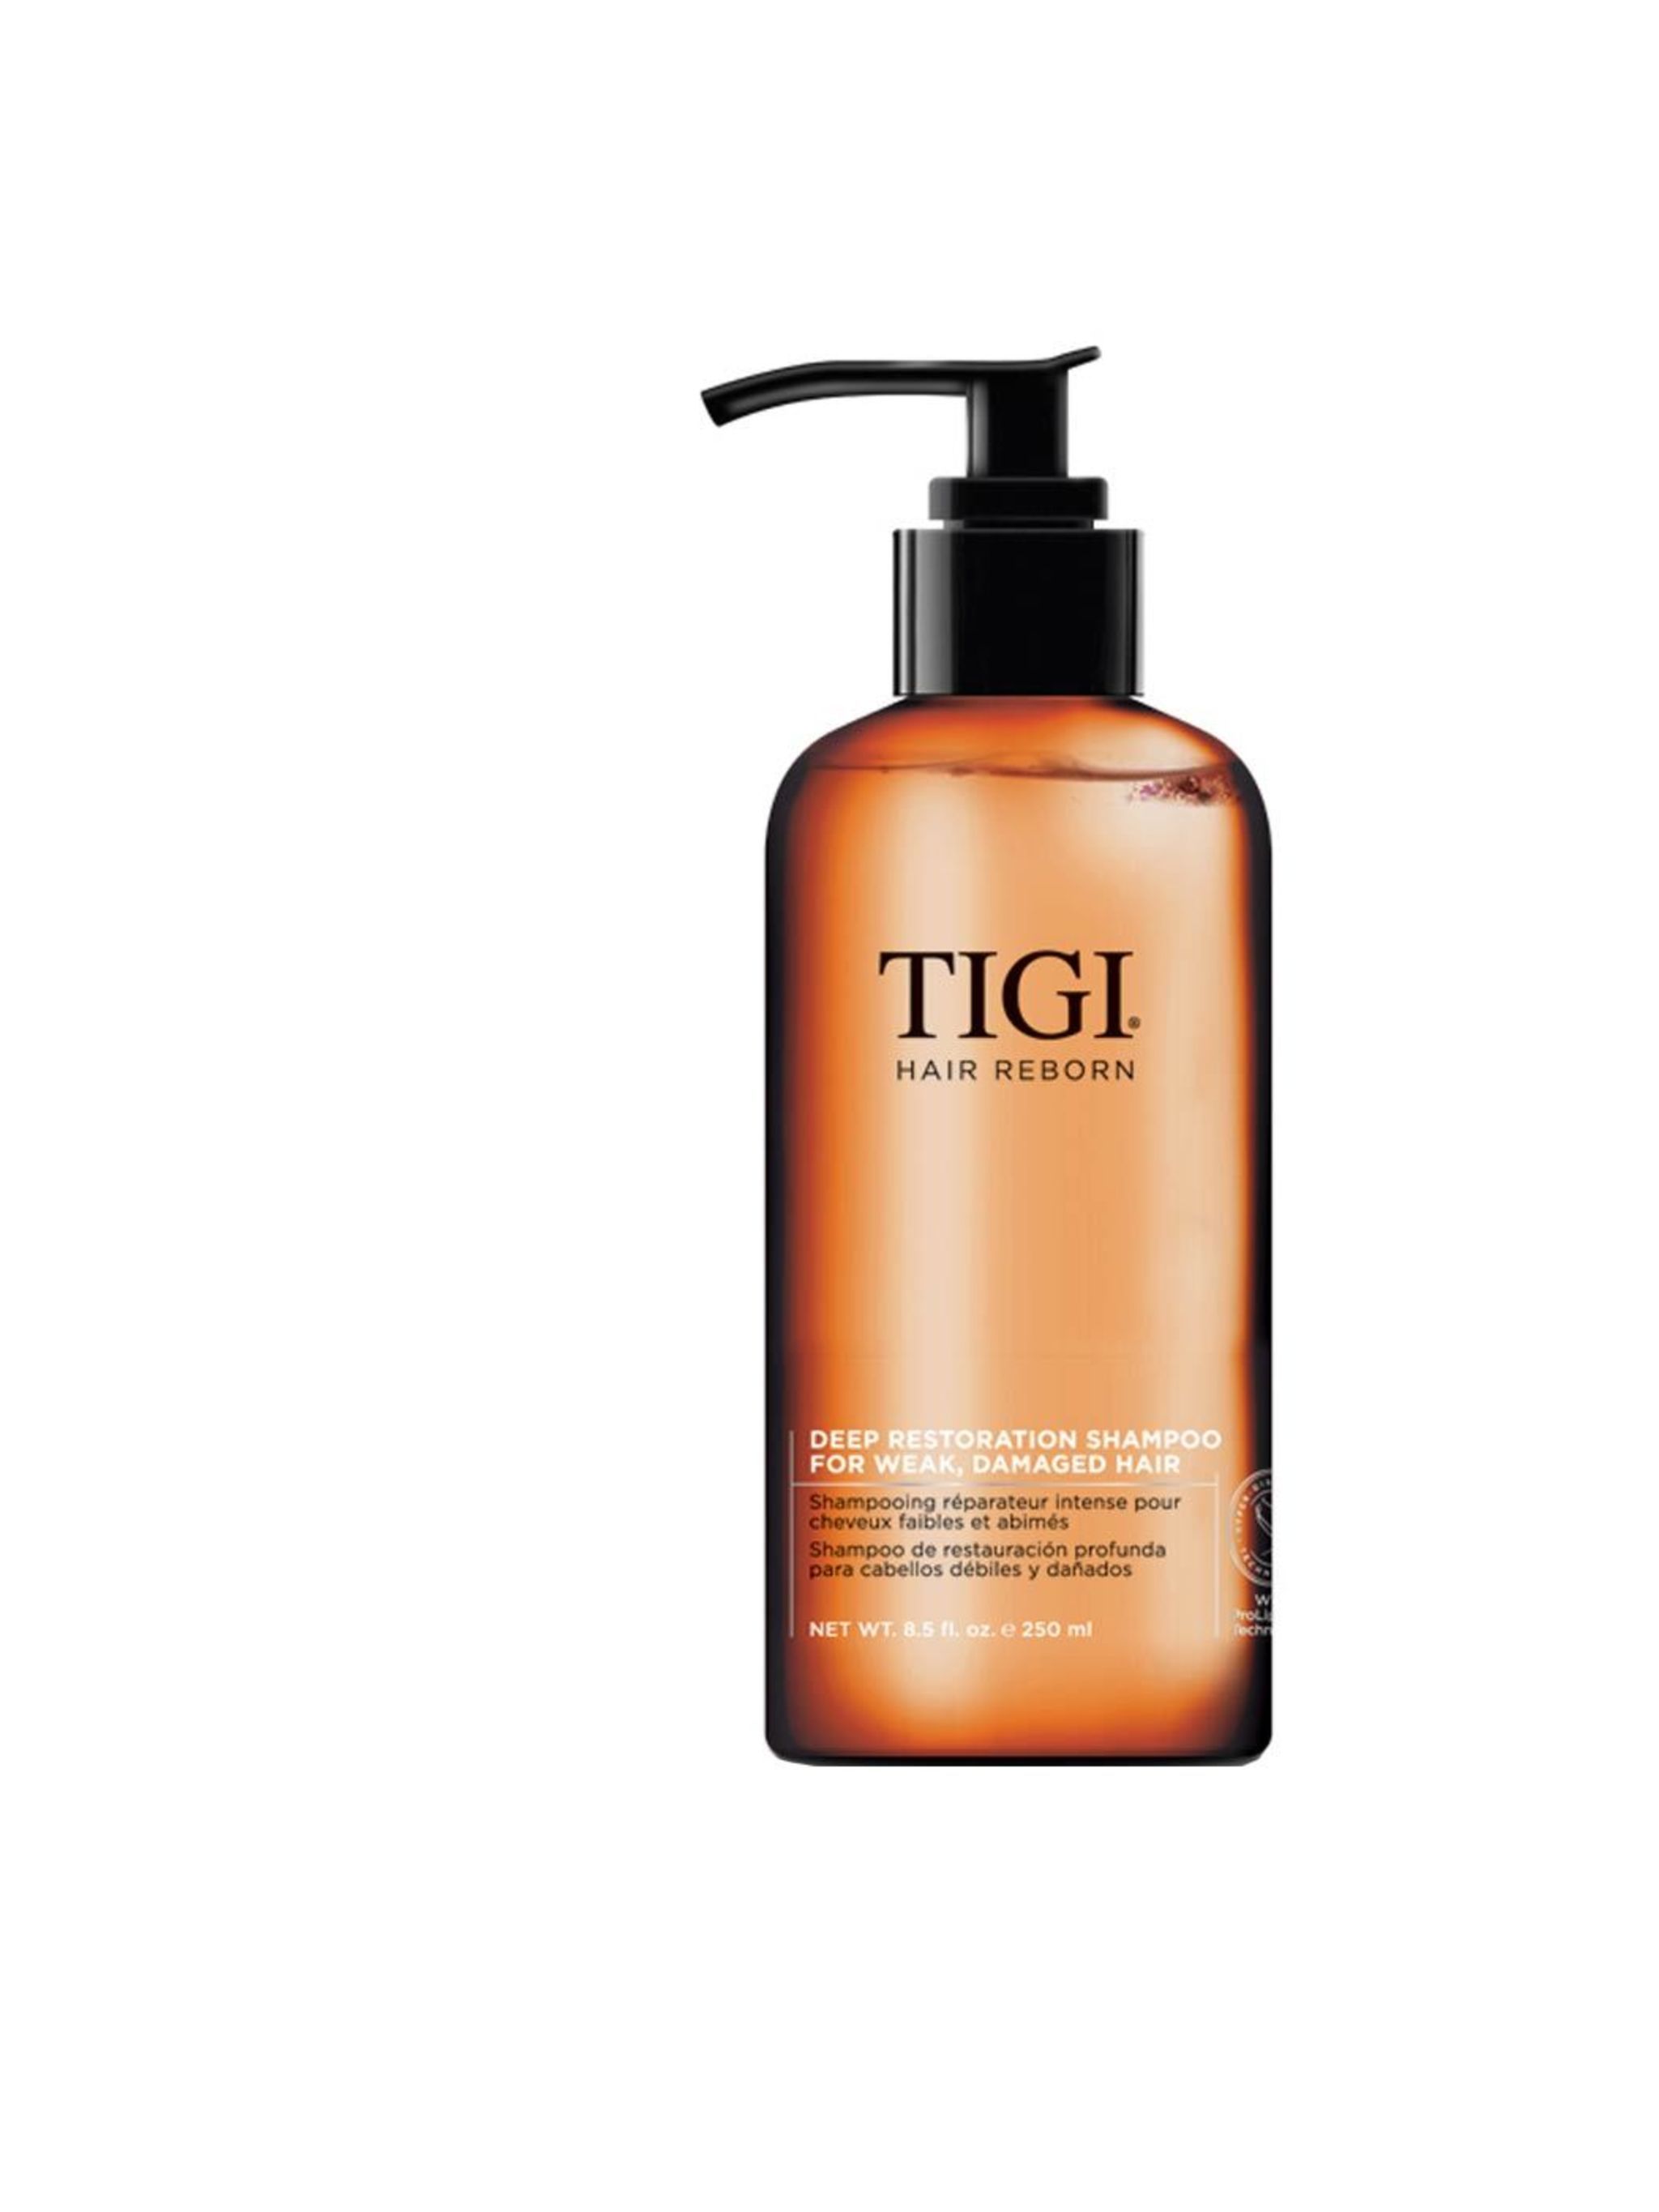 The 13 Life-Changing Hair Products